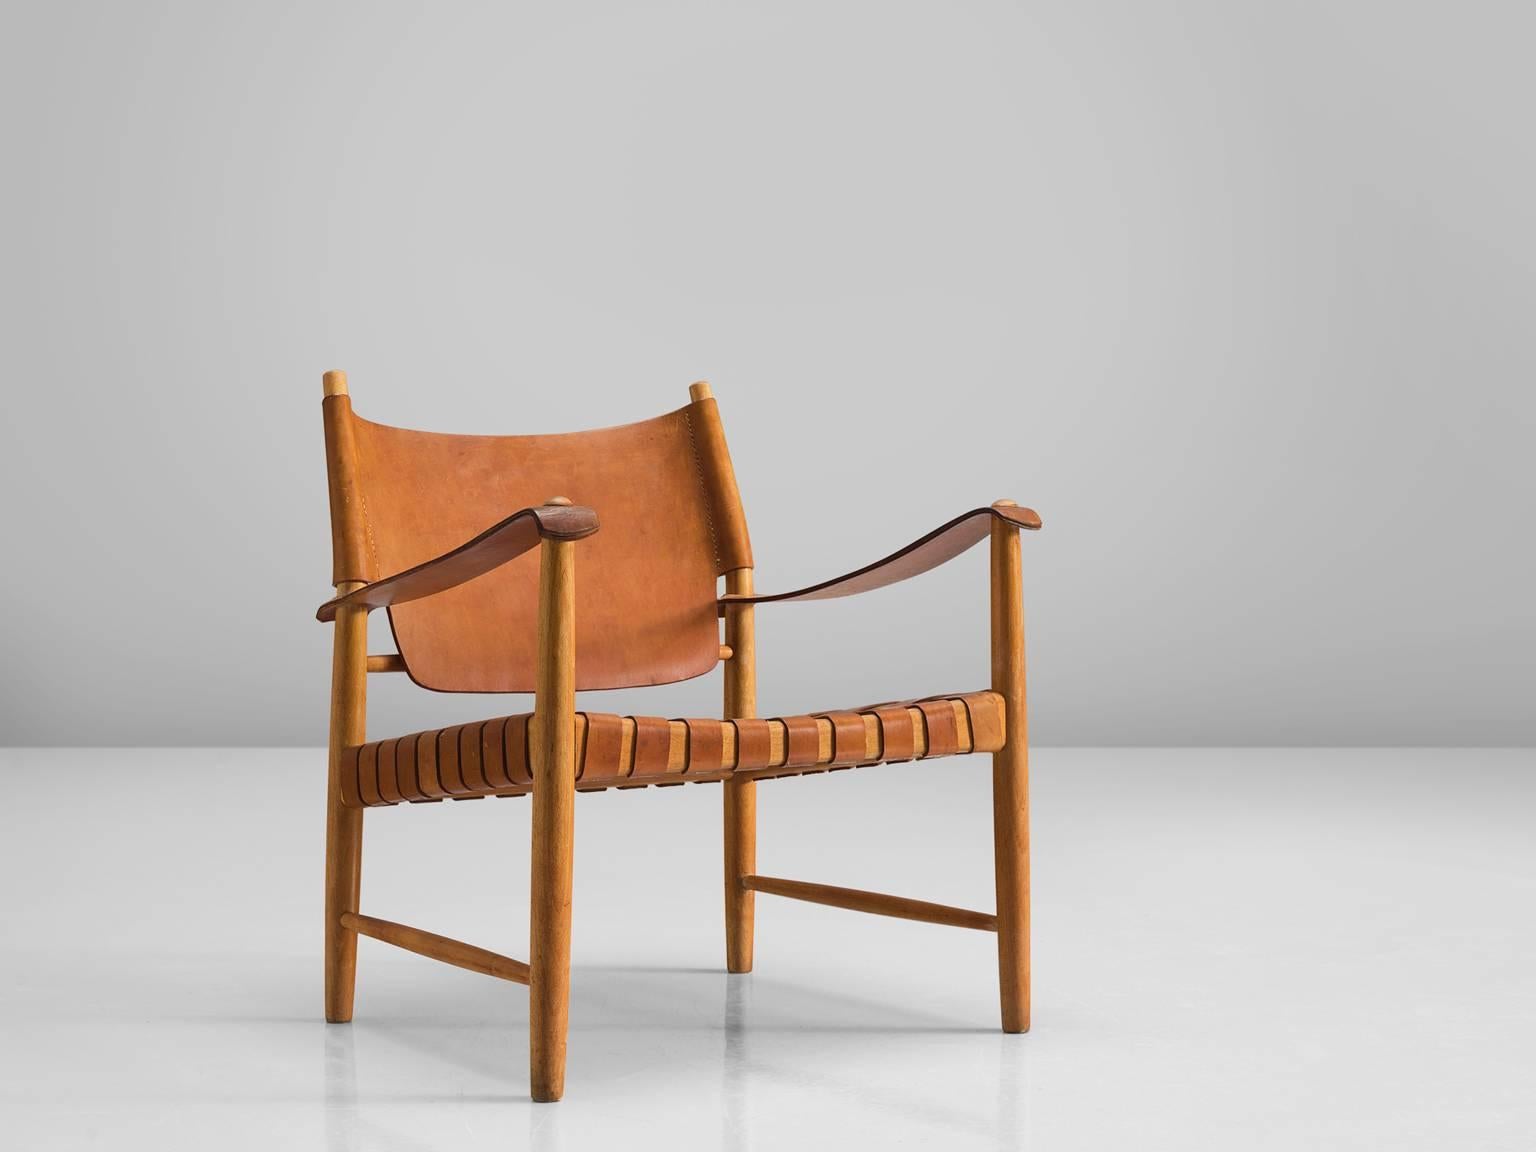 Safari chair, leather, beech, Denmark, 1950s.

This elegant safari chair features wonderful patinated leather on both seat and back. The patina on this chair creates a vibrant look and the straps in the seat form a thick, well-constructed yet